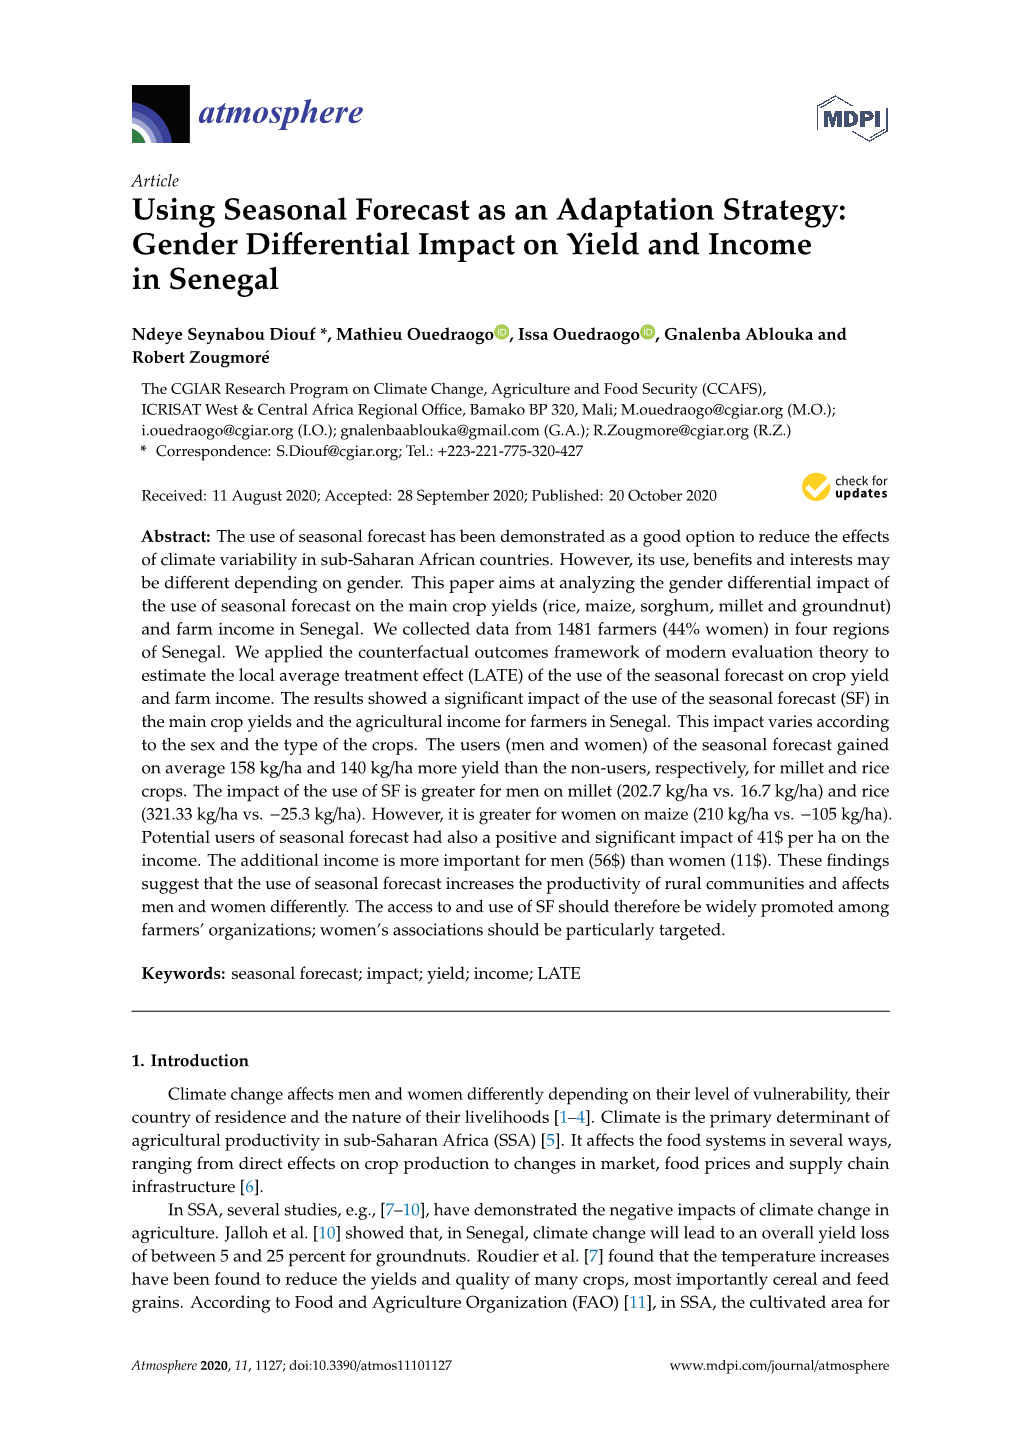 Using Seasonal Forecast As an Adaptation Strategy: Gender Diﬀerential Impact on Yield and Income in Senegal